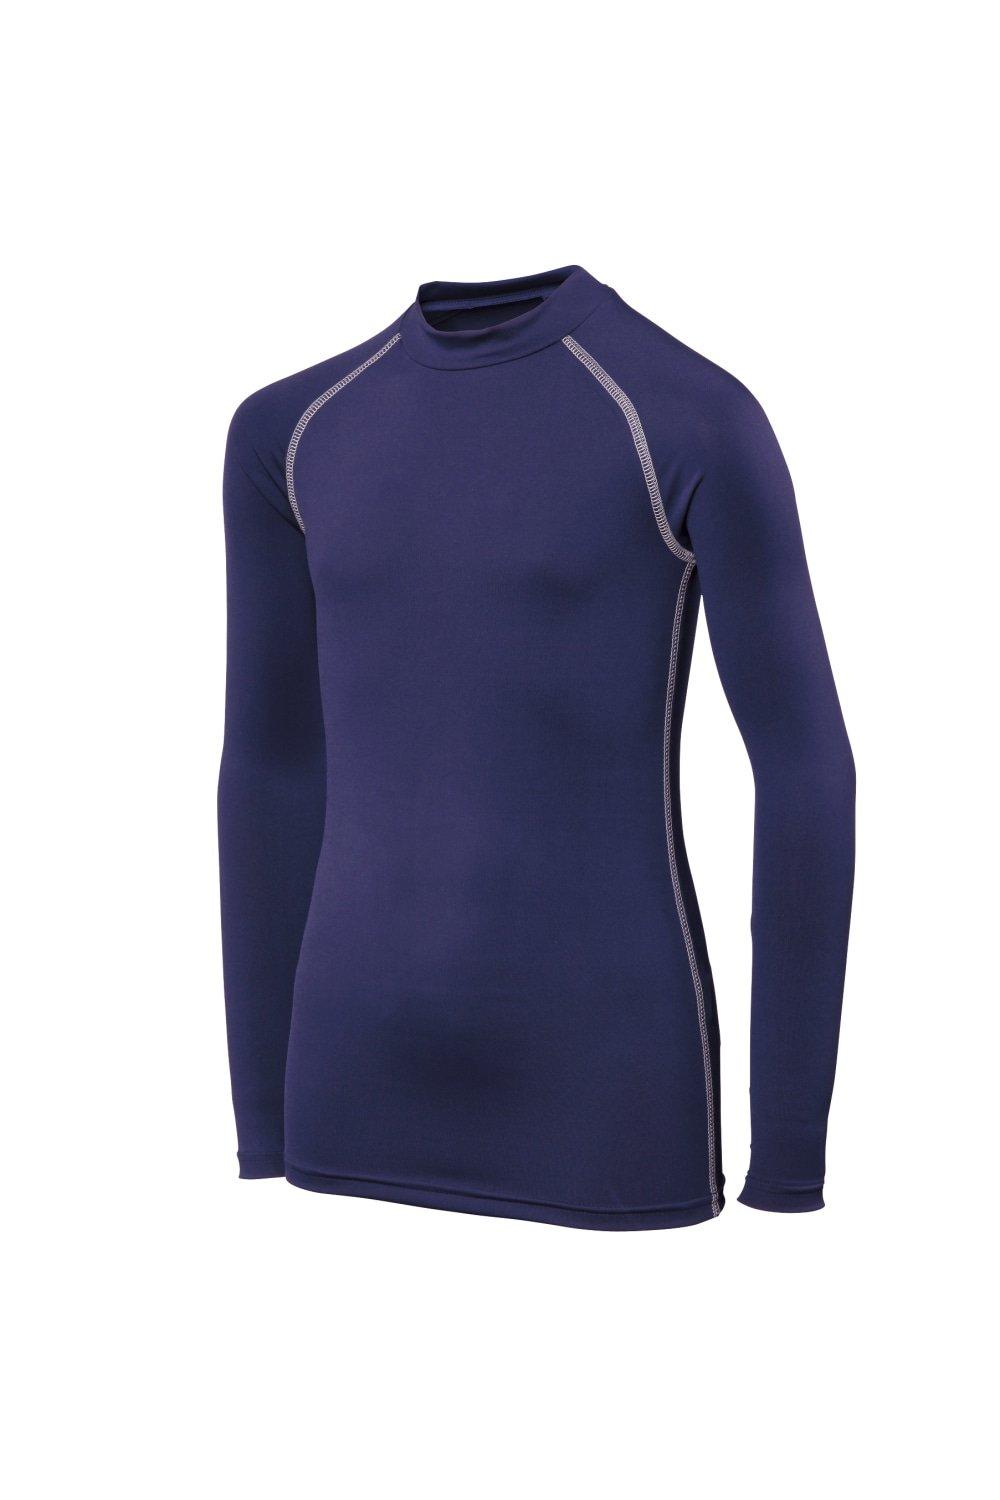 Long Sleeve Thermal Underwear Base Layer Vest Top